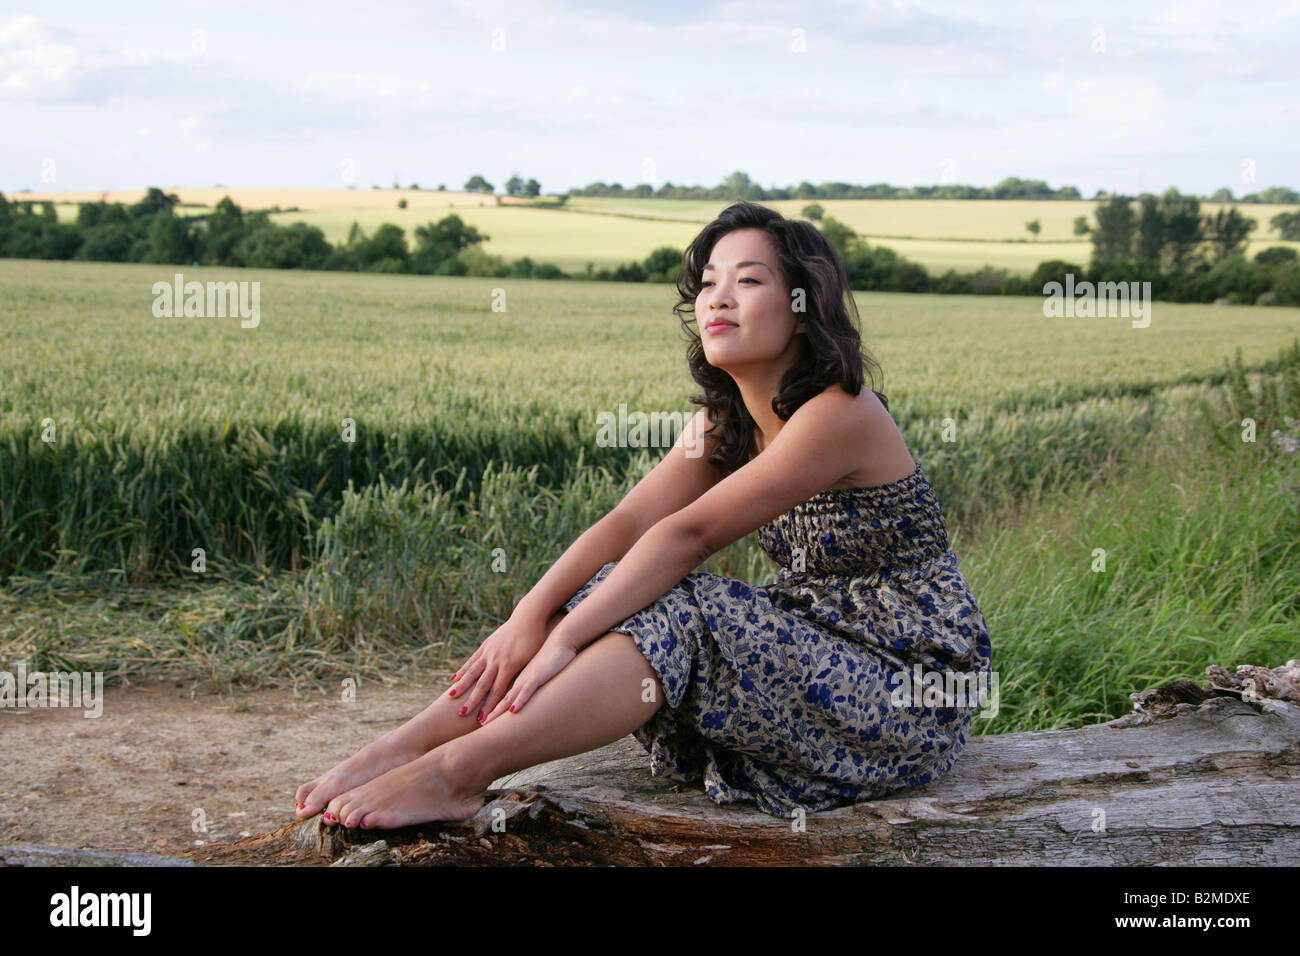 Chinese Girl Sitting on a Log in Front of a Cornfield Stock Photo